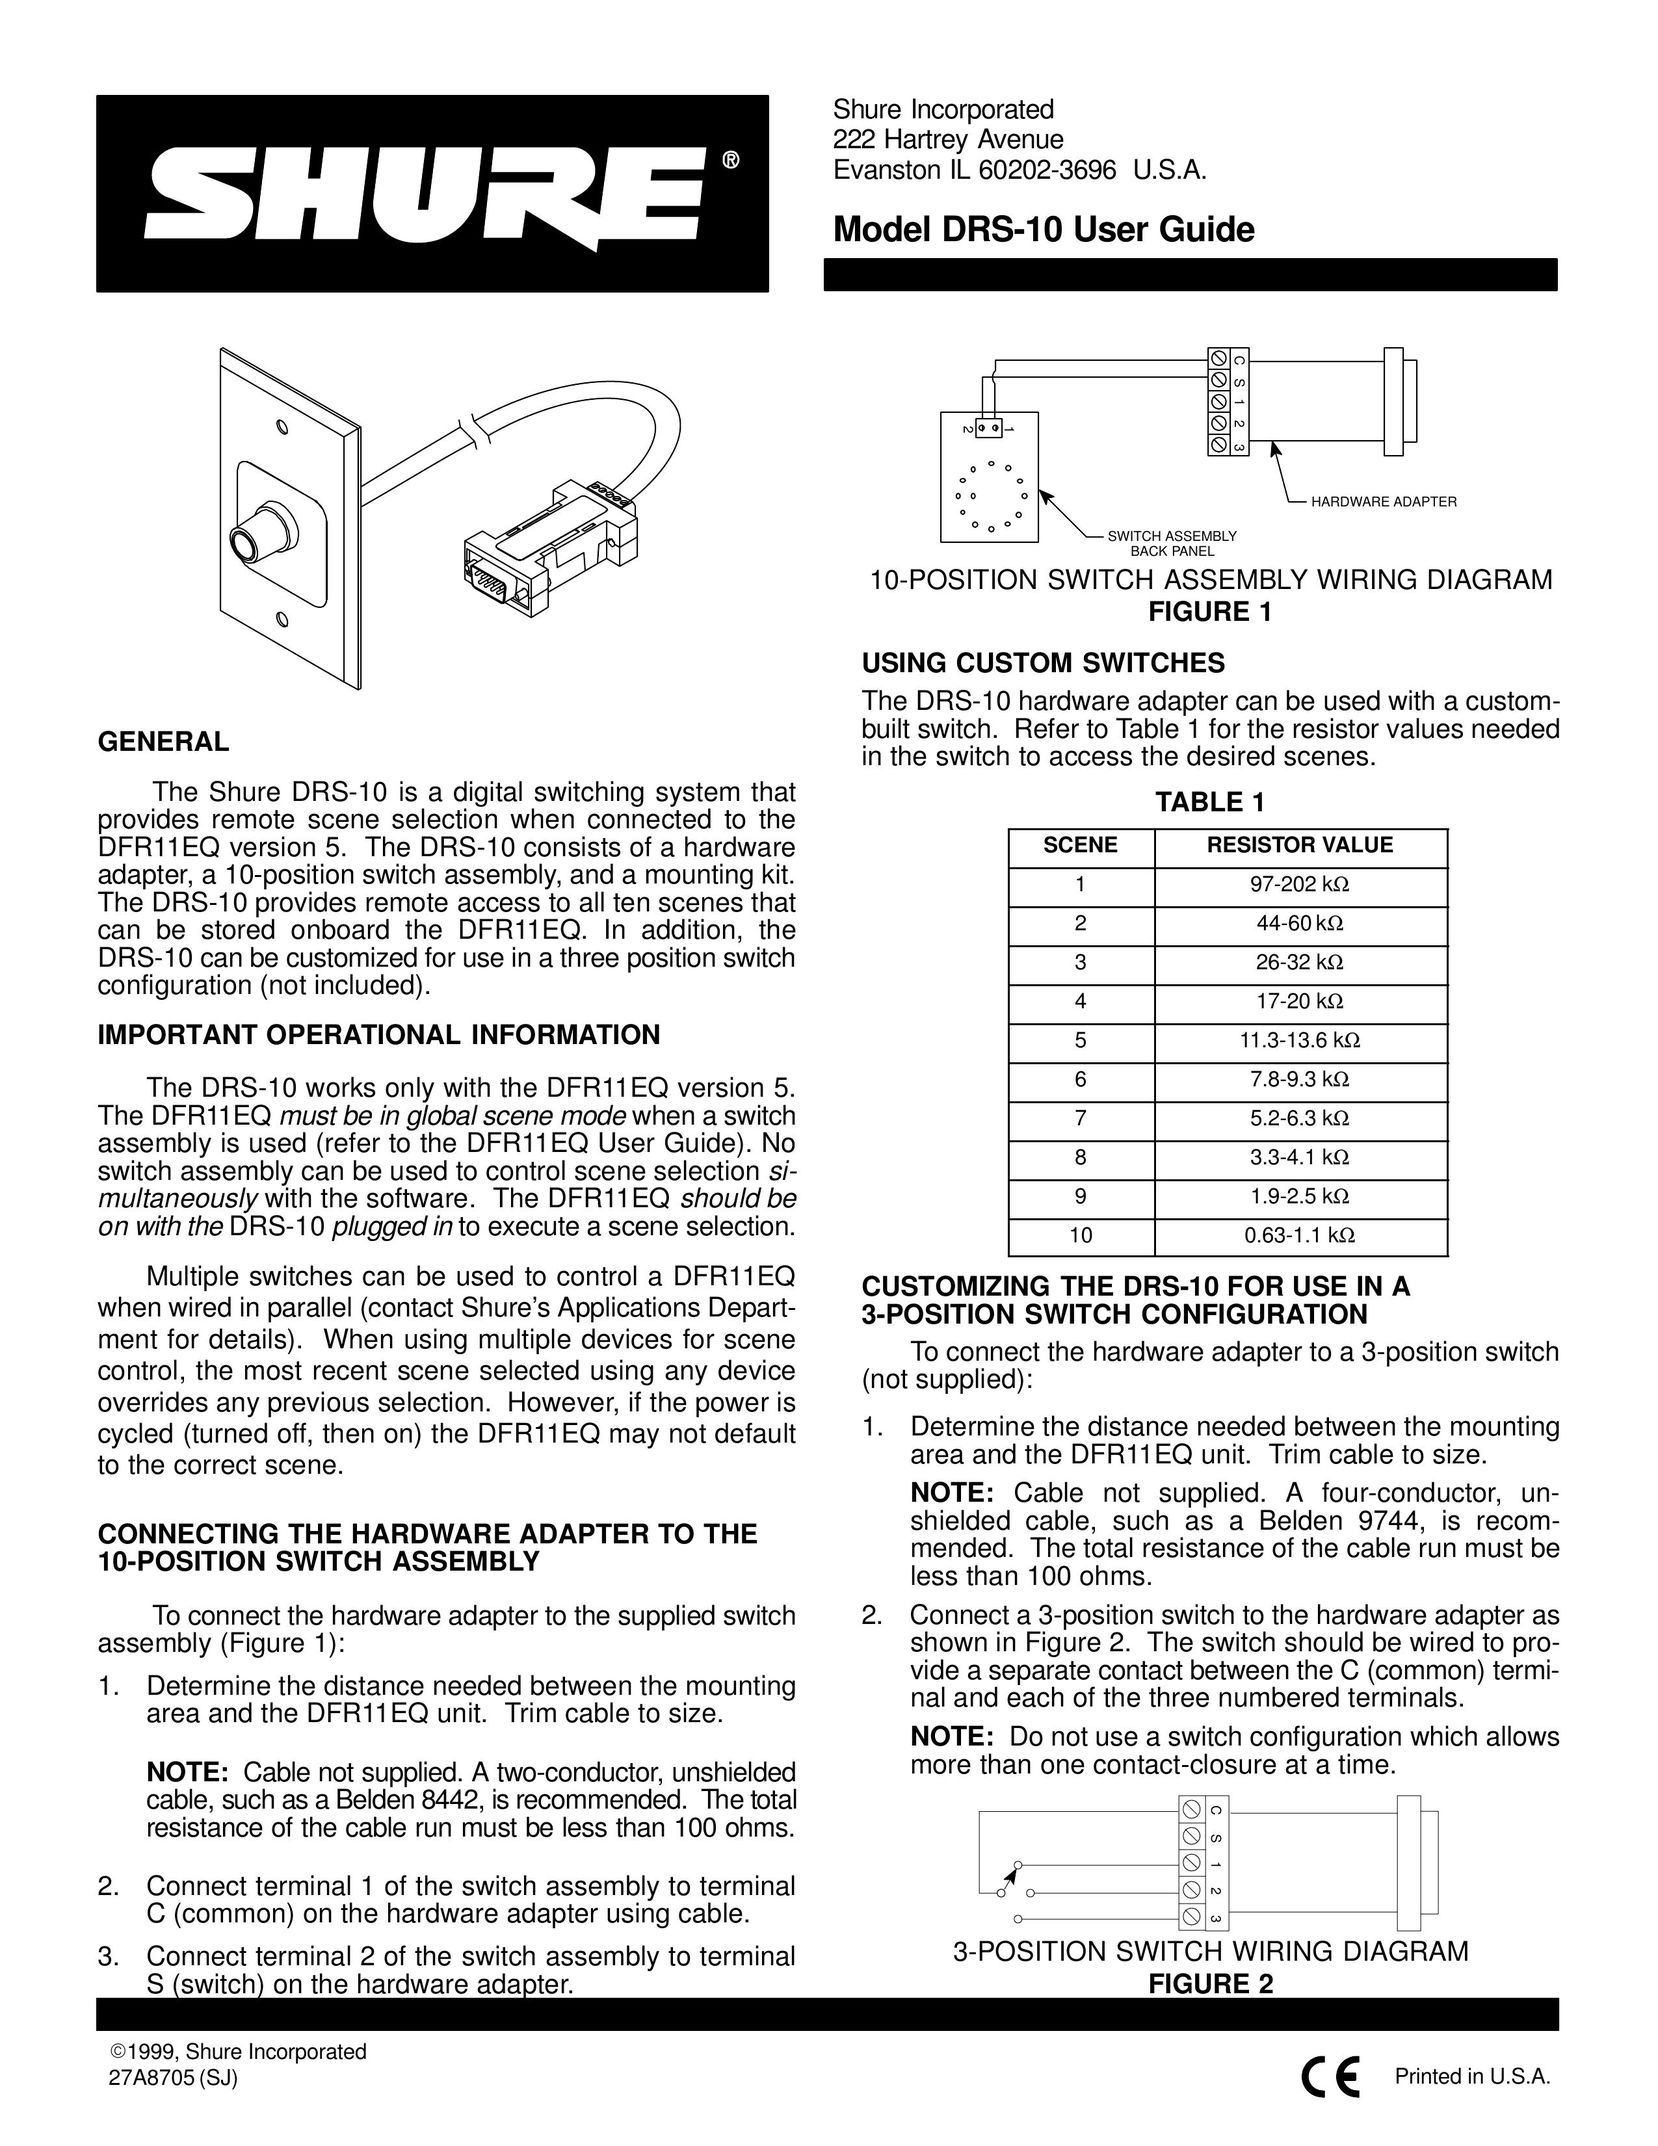 Shure DRS-10 Switch User Manual